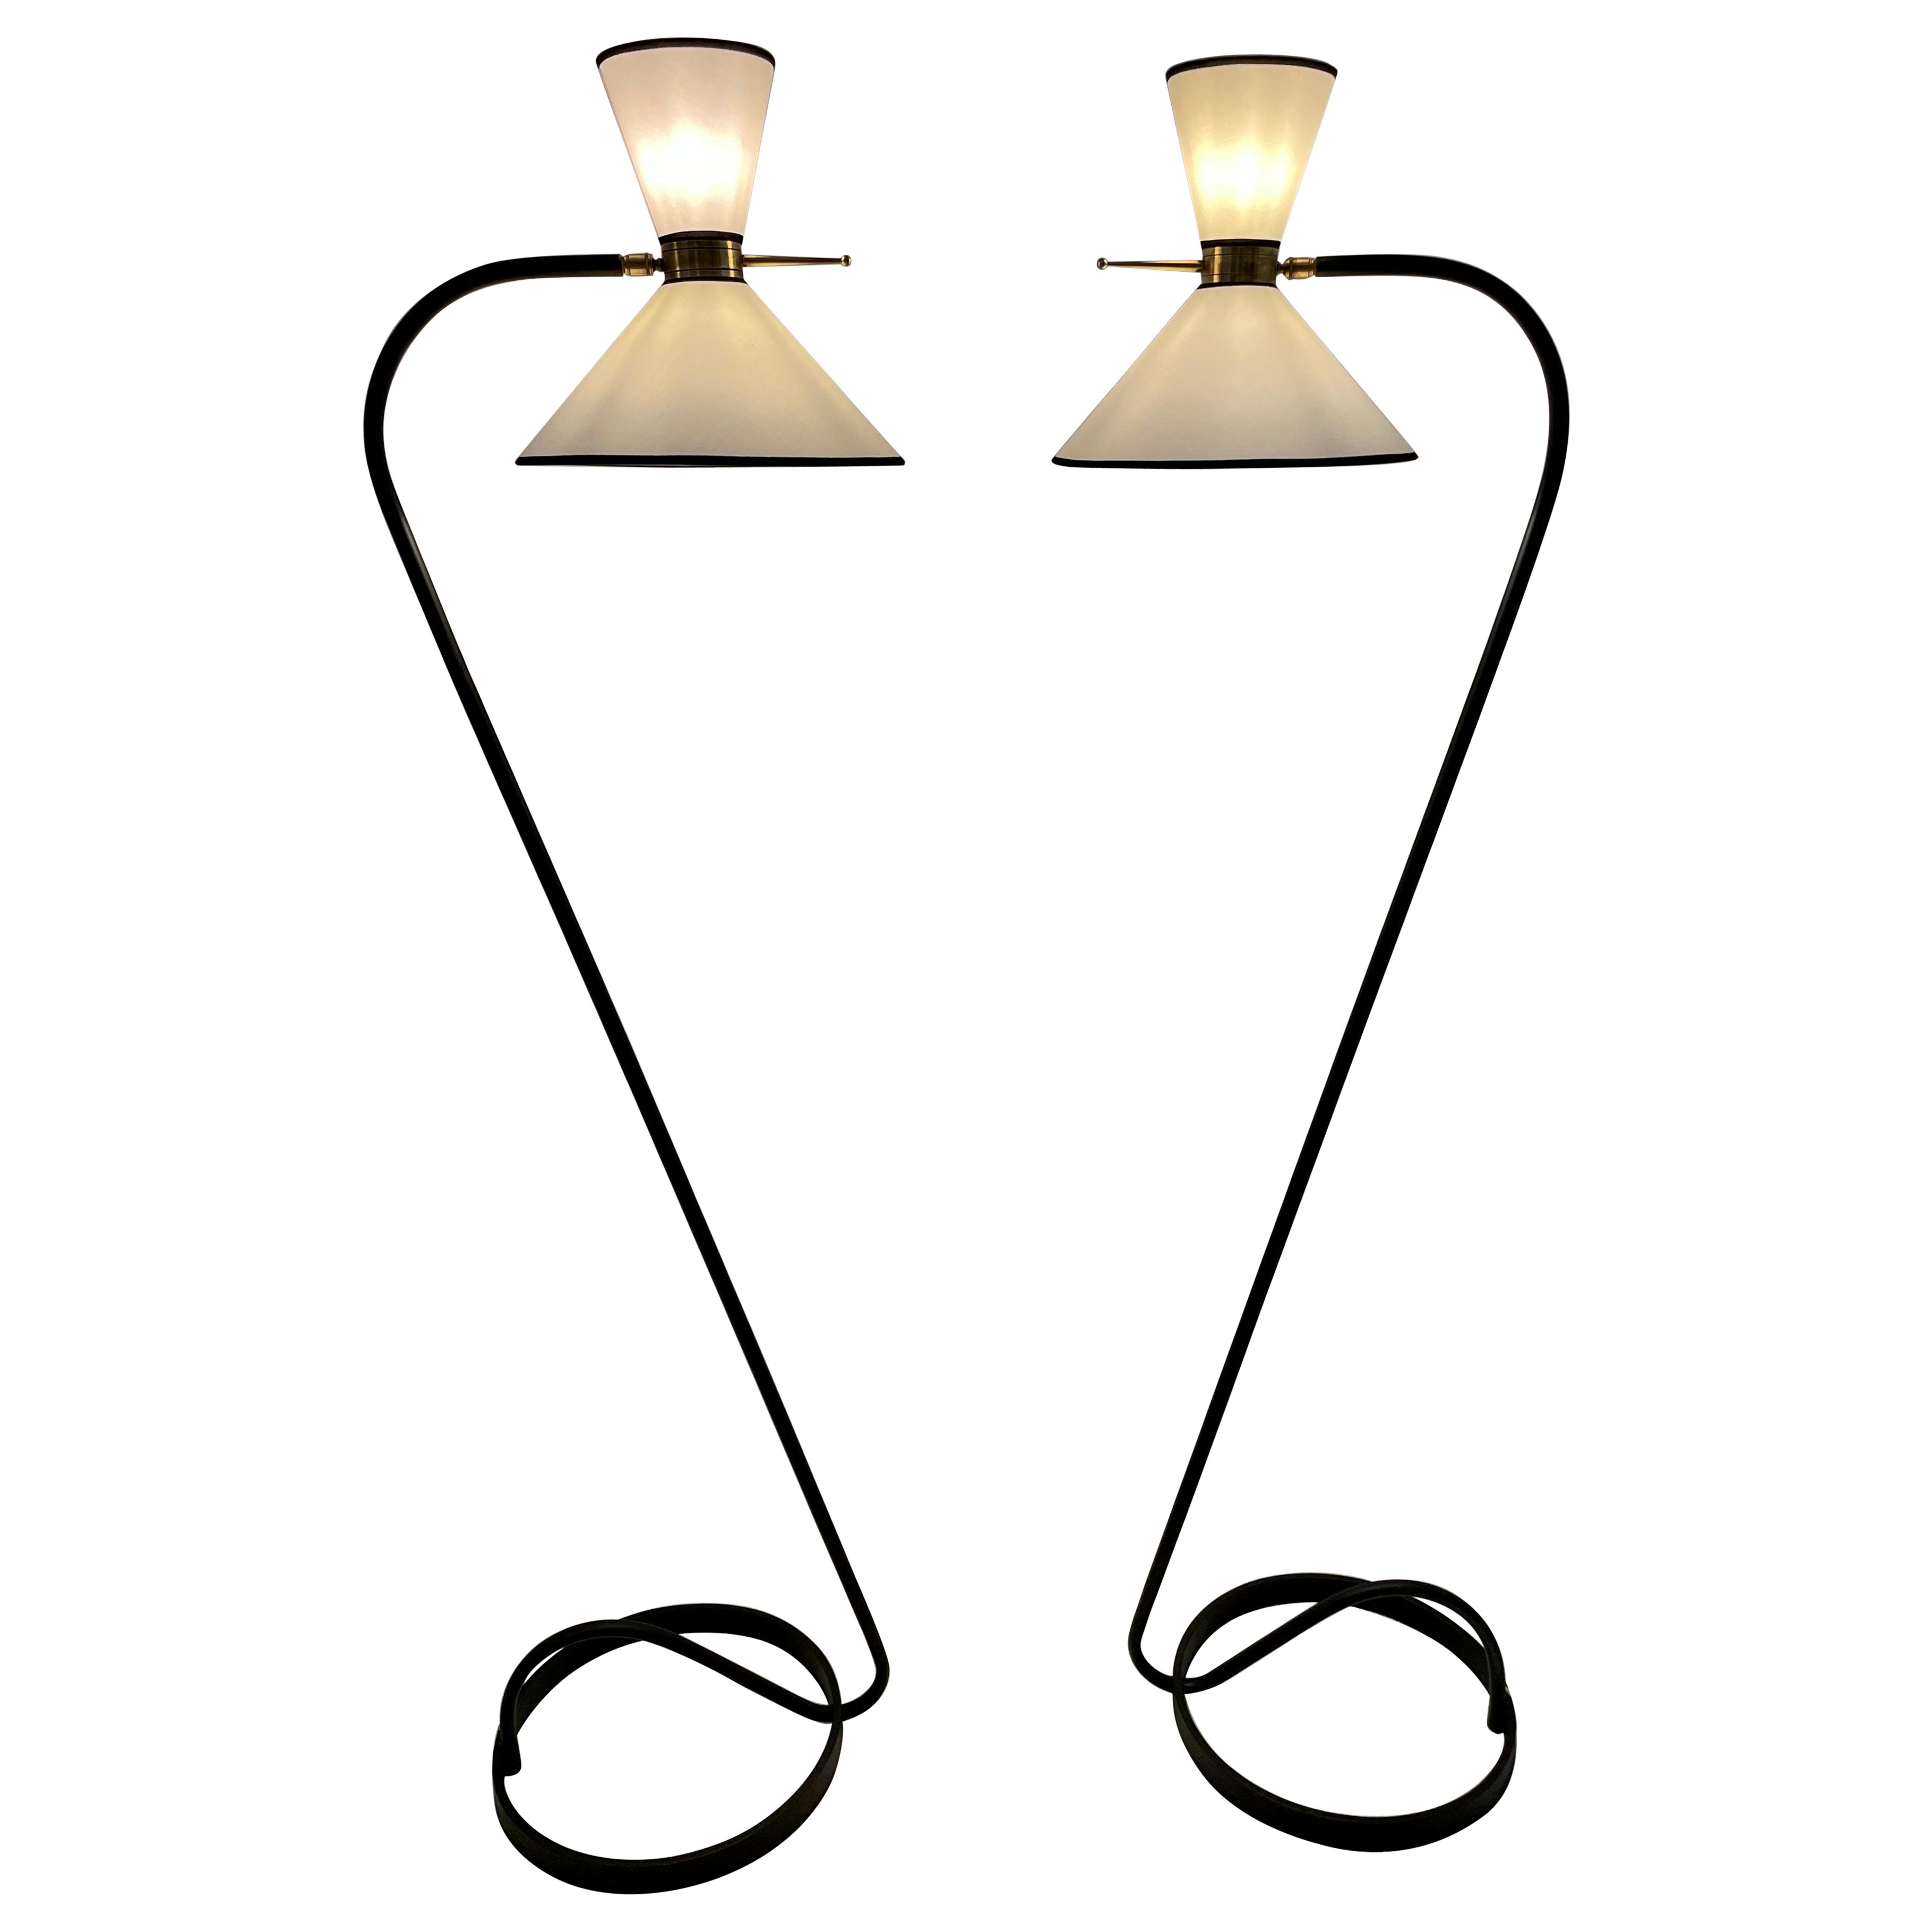 Pair of Floor Lamps by Lunel